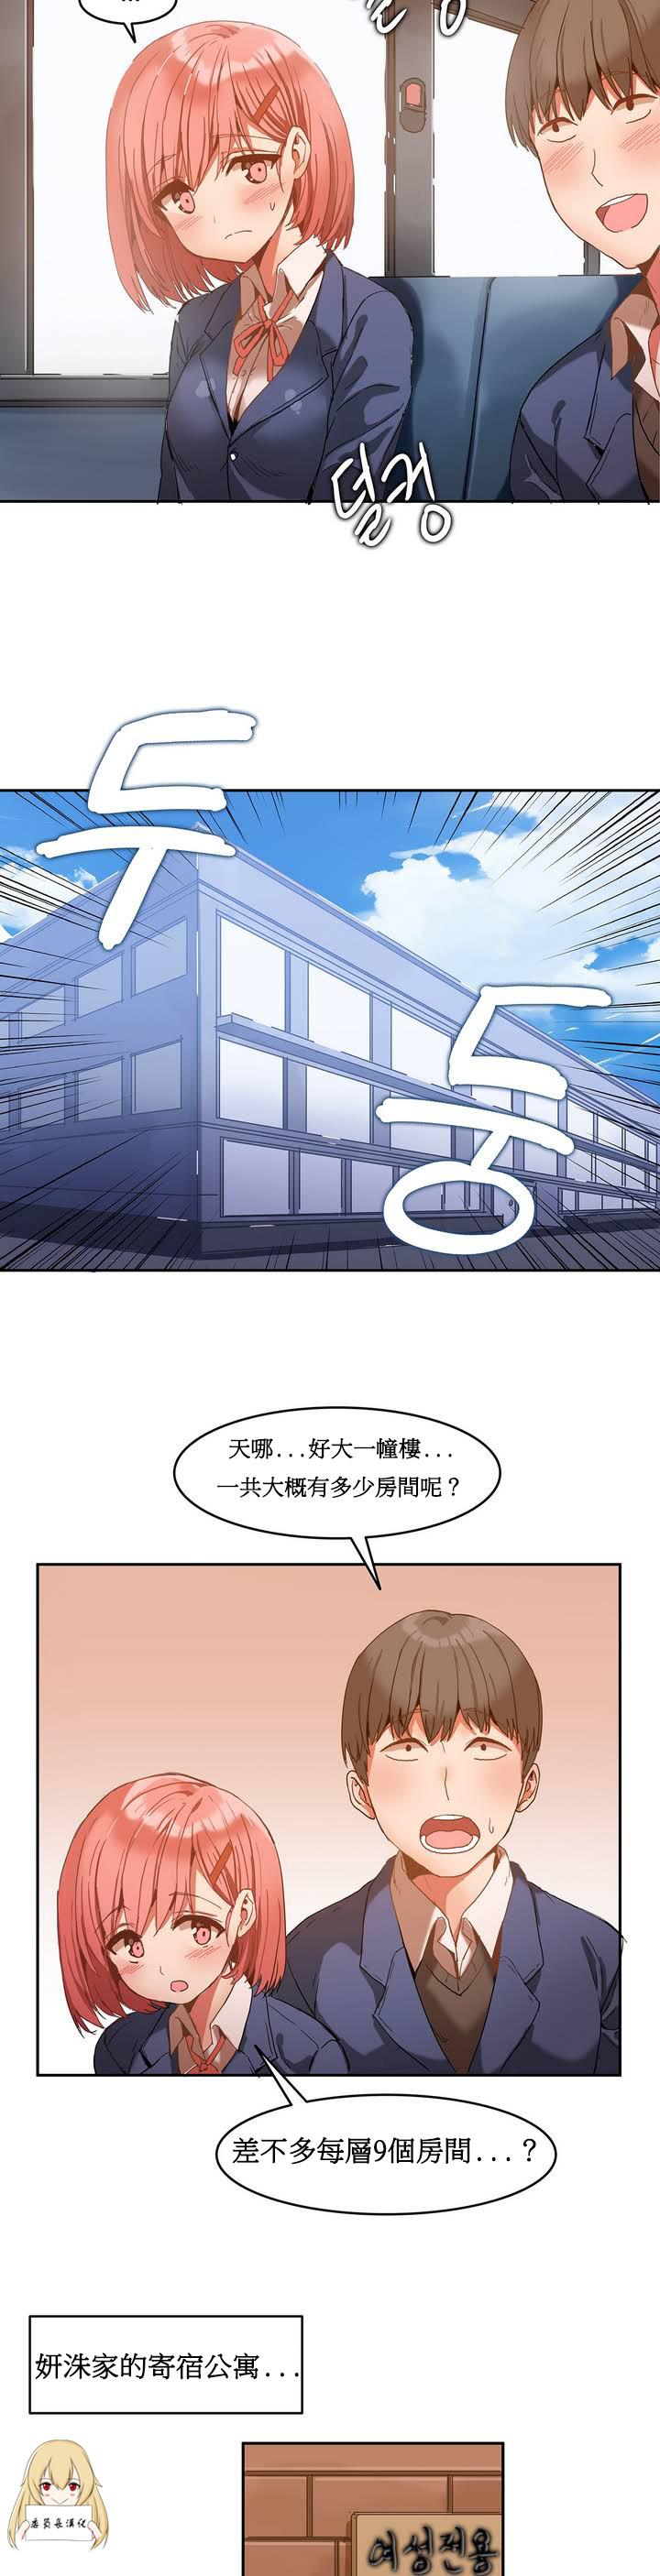 Lima Hahri's Lumpy Boardhouse Ch. 0~24【委員長個人漢化】（持續更新） Long - Page 11